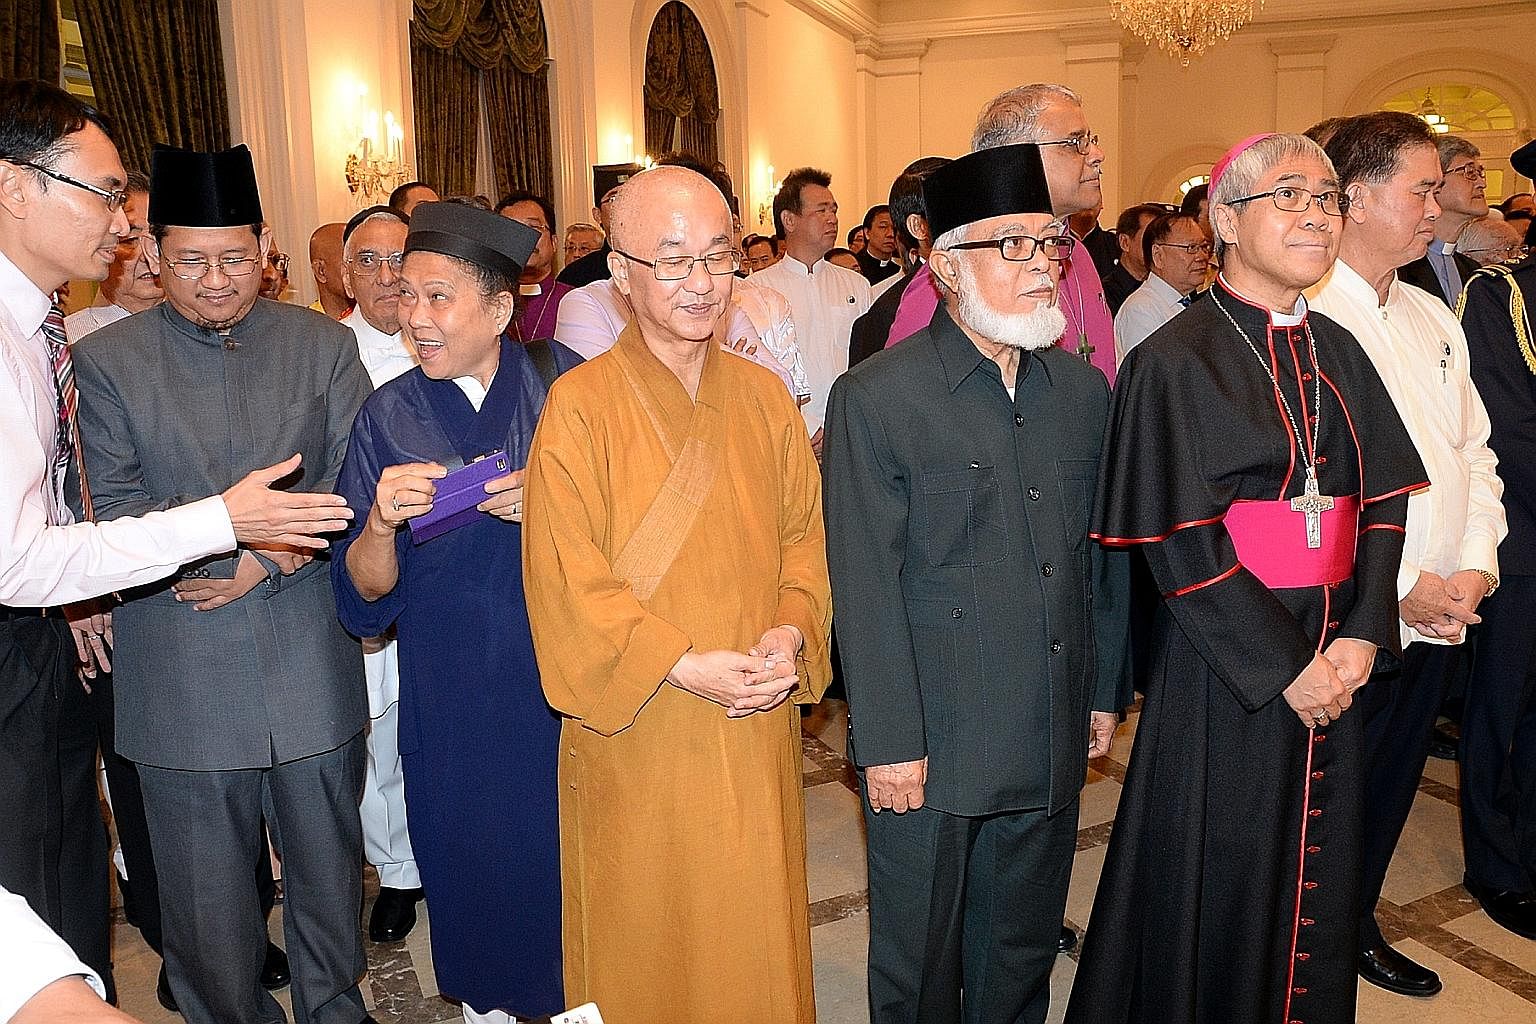 Leaders of the main faiths in Singapore, including (second from left) Mufti Mohd Fatris Bakaram; a representative from the Taoist faith; Venerable Seck Kwang Phing; former Mufti Shaikh Syed Isa; Archbishop William Goh from the Catholic Church; and Mr